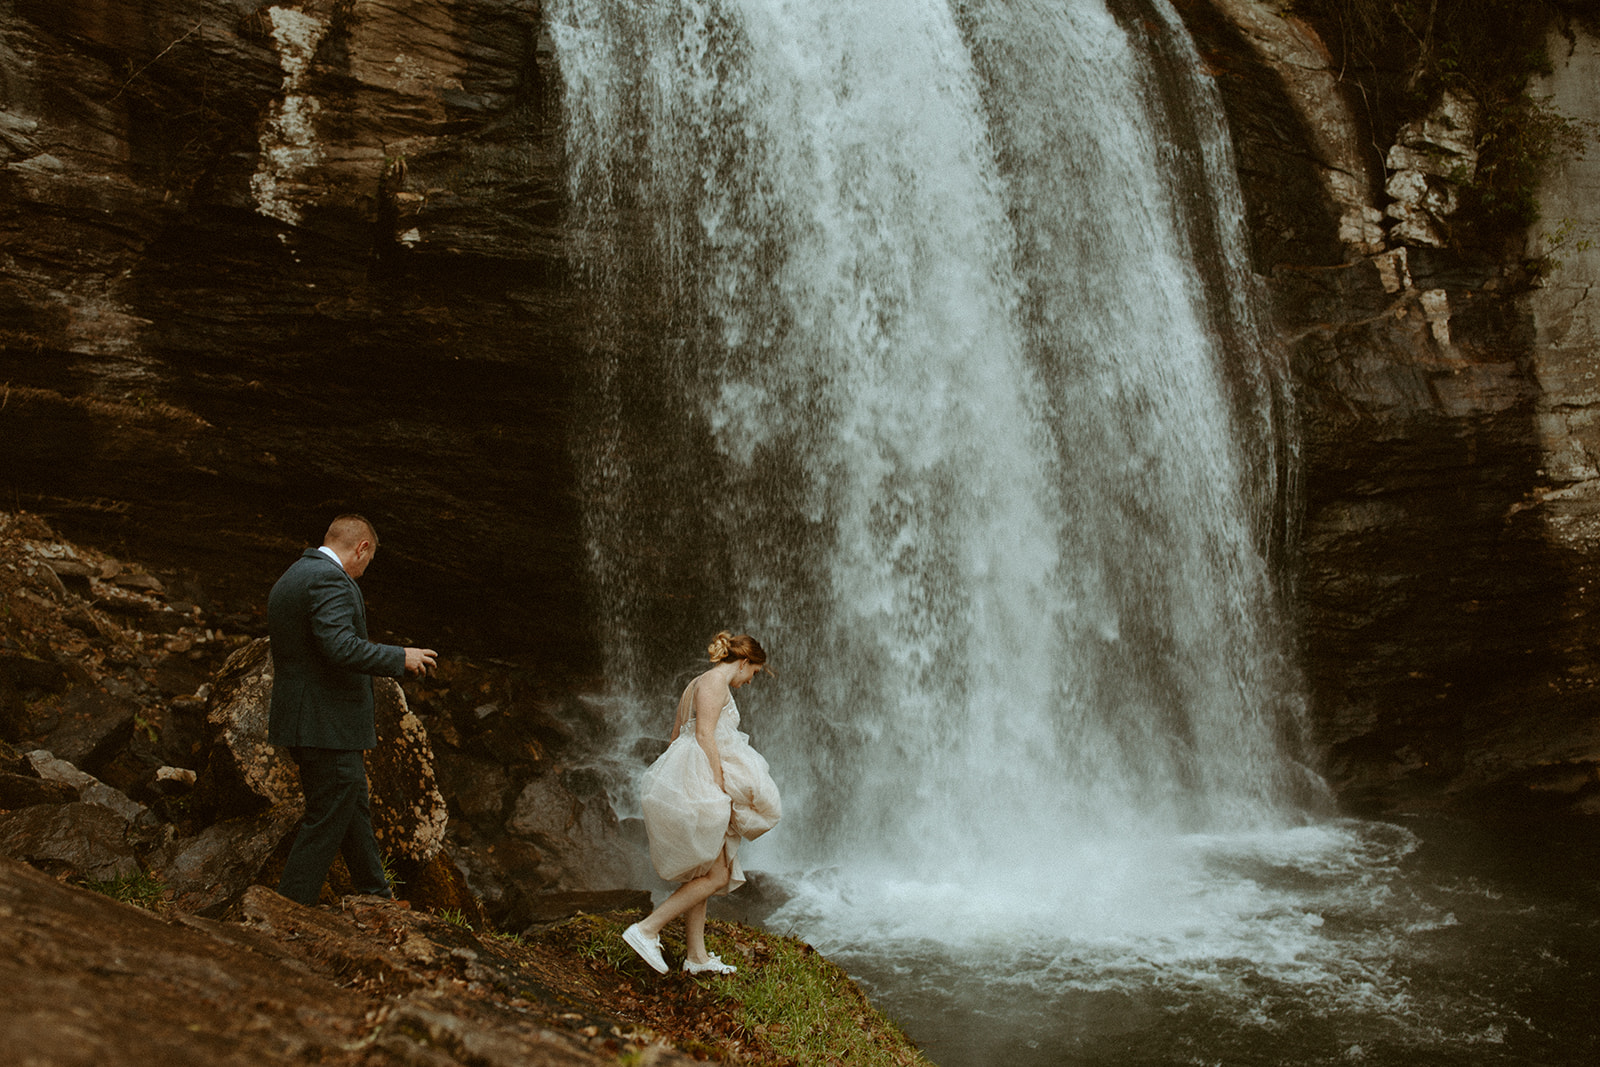 Husband and wife tread over rocks near a flowing waterfall in wedding attire